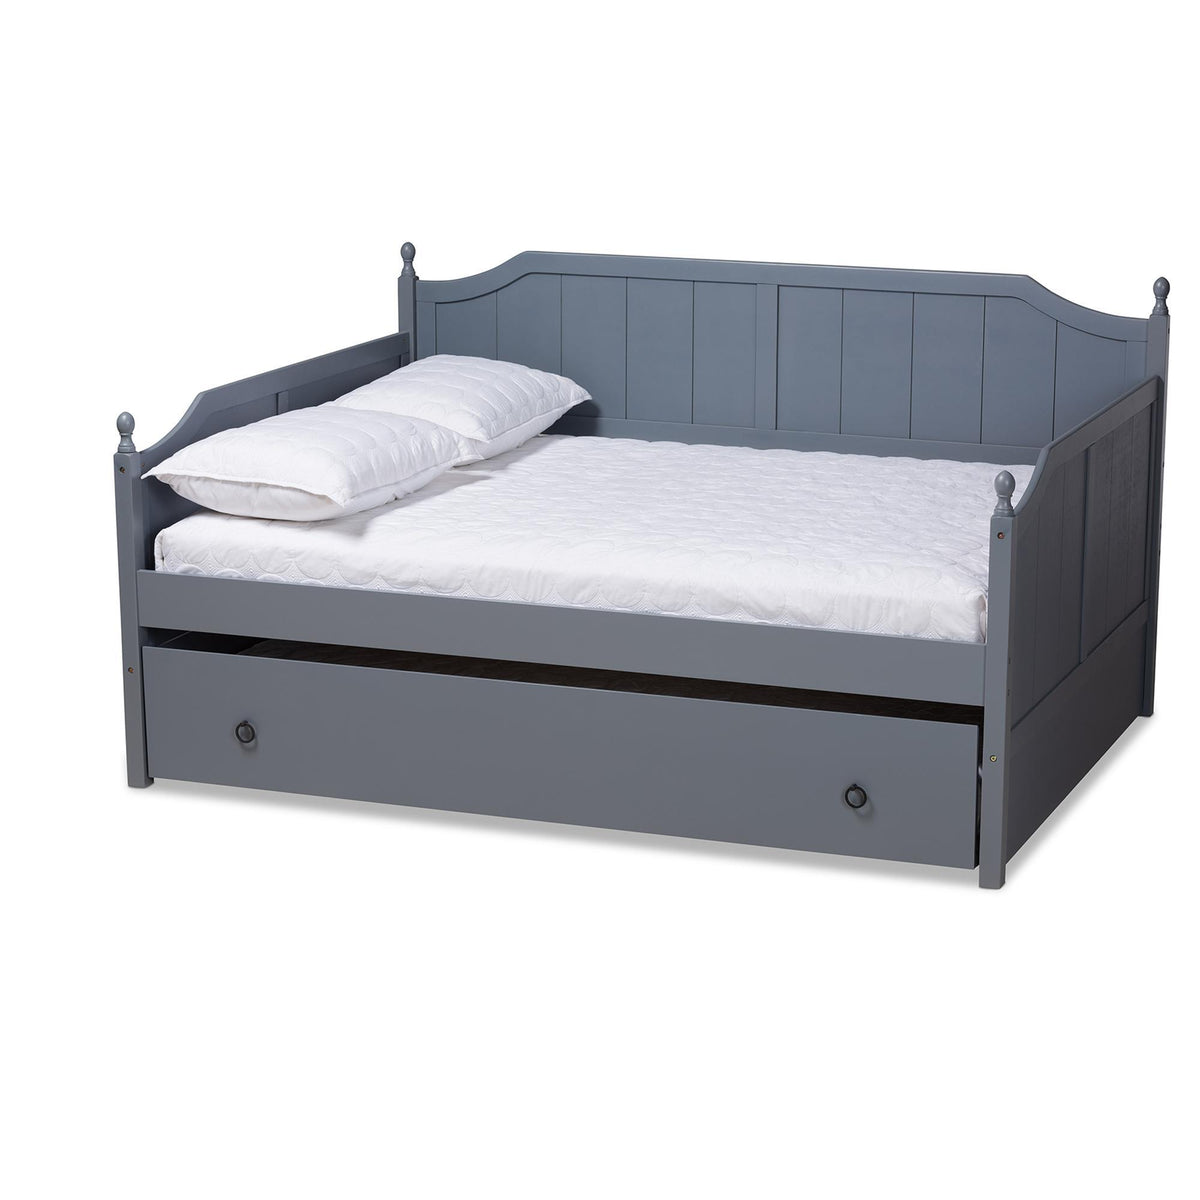 Baxton Studio Millie Cottage Farmhouse Grey Finished Wood Full Size Daybed With Trundle - MG0010-Grey-Daybed-Full